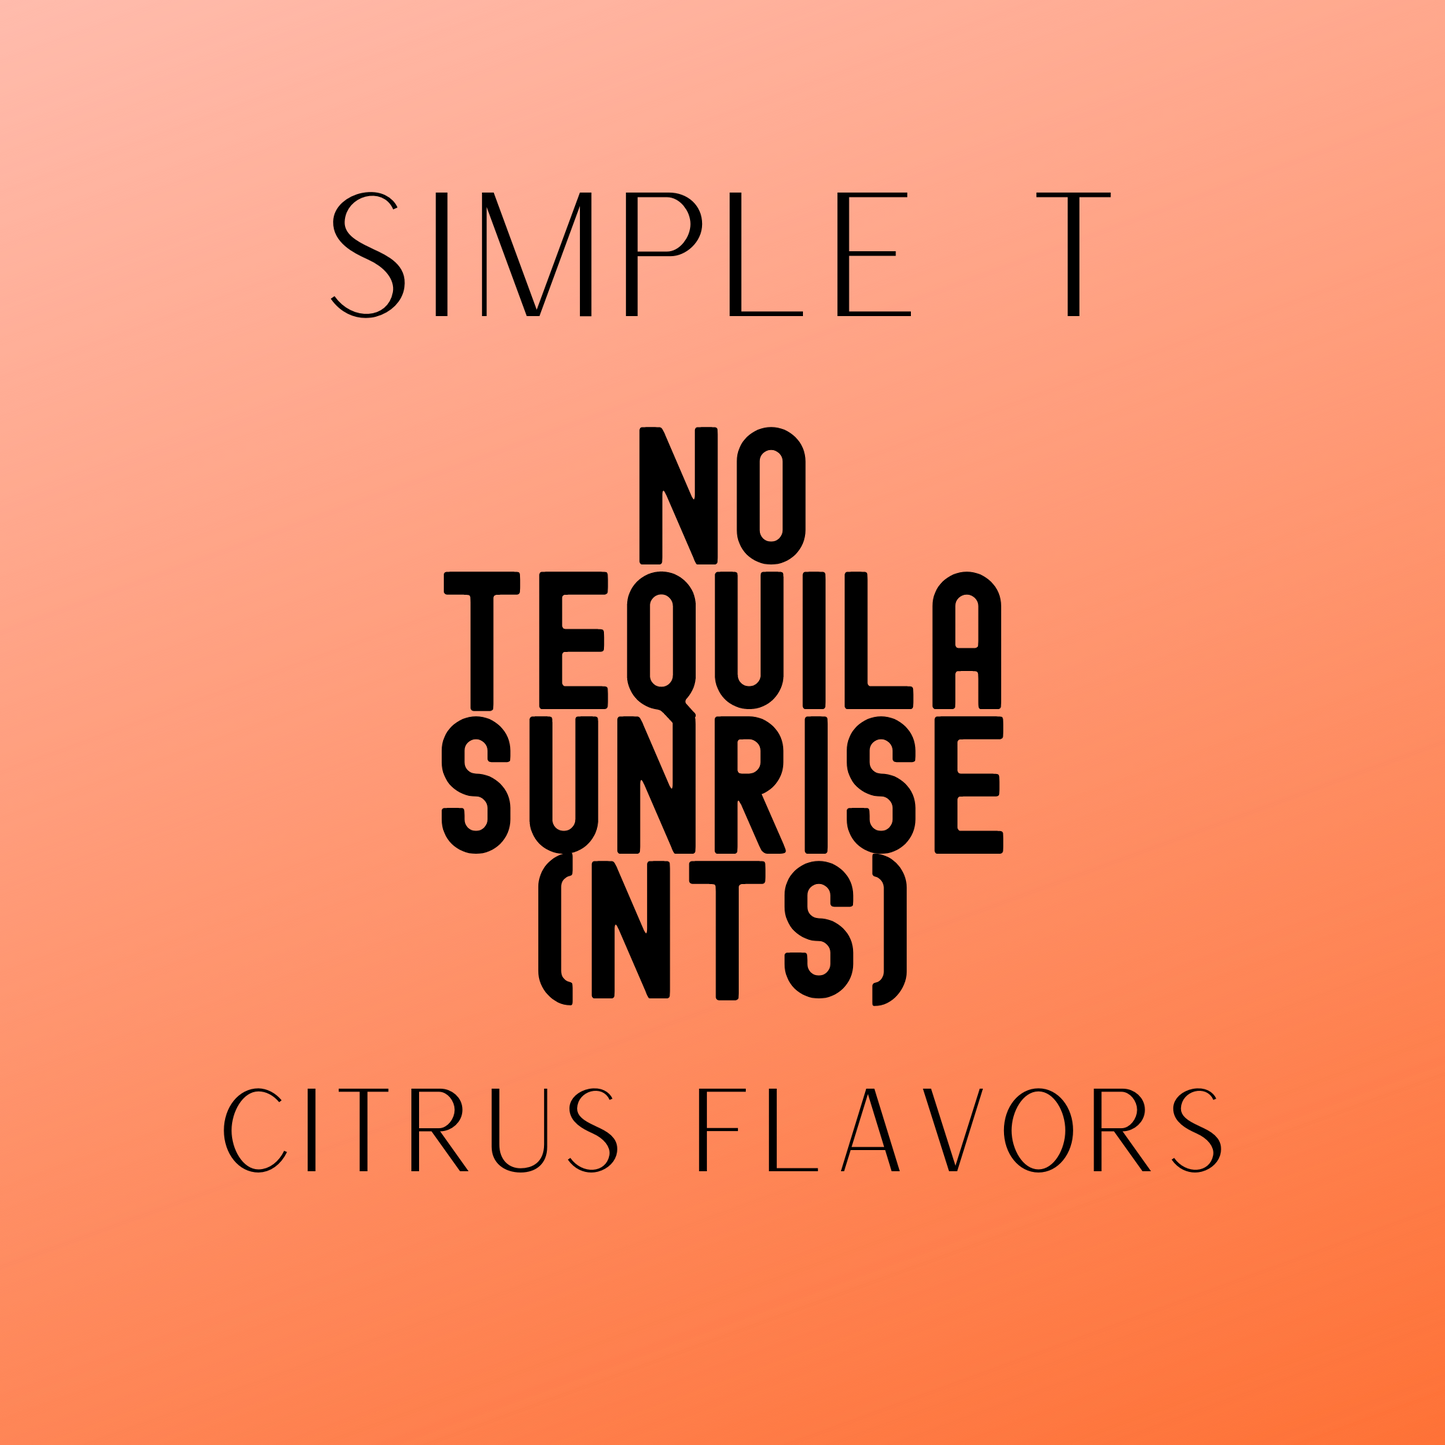 No Tequila Sunrise (NTS) Simply T Packets (Citrus Flavors)